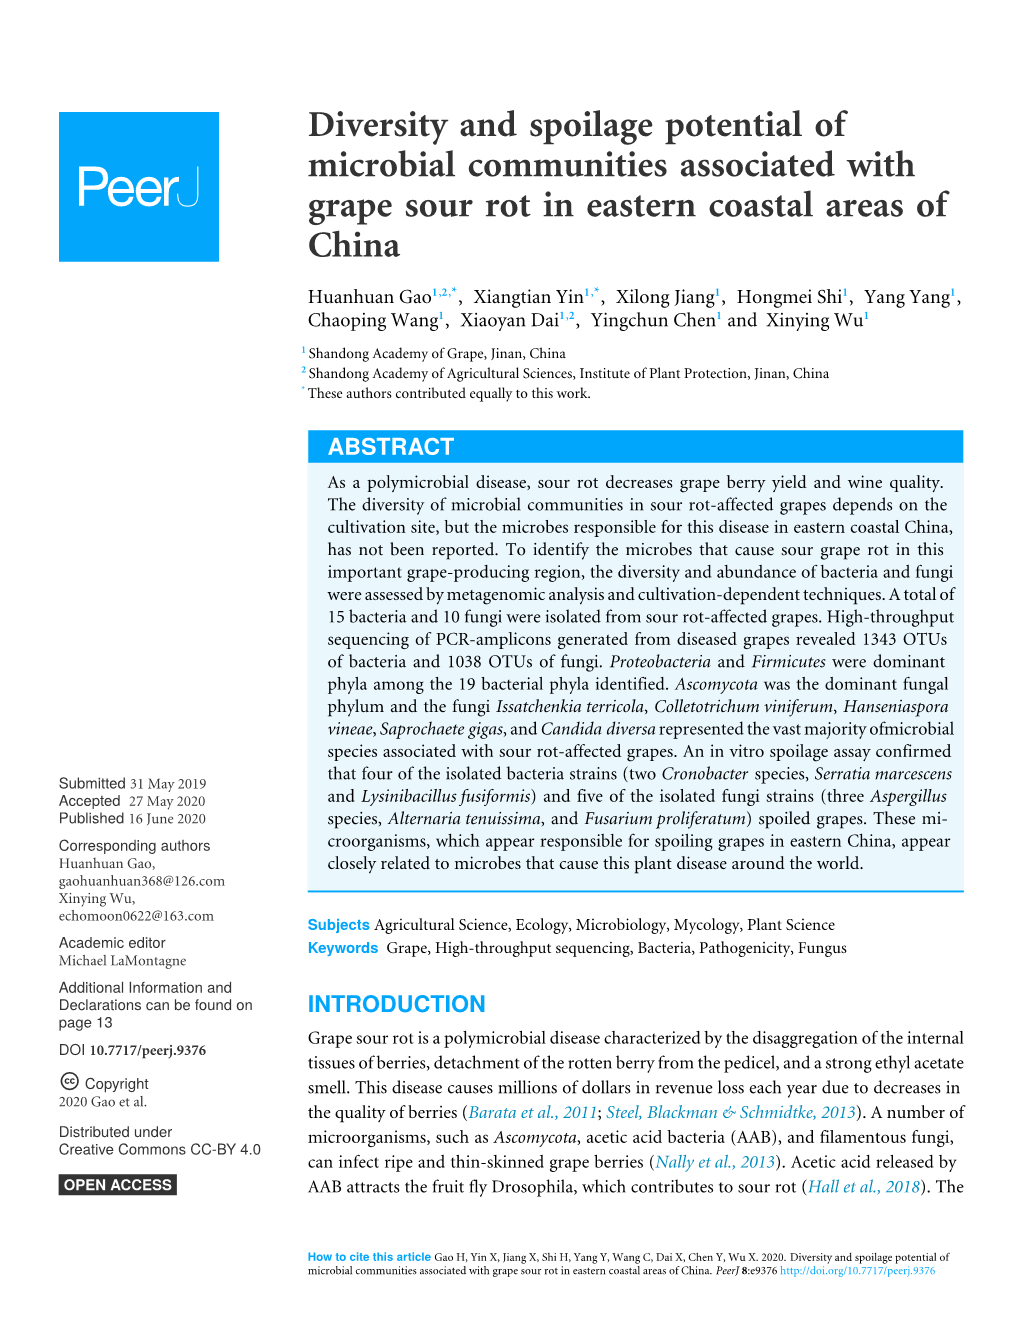 Diversity and Spoilage Potential of Microbial Communities Associated with Grape Sour Rot in Eastern Coastal Areas of China